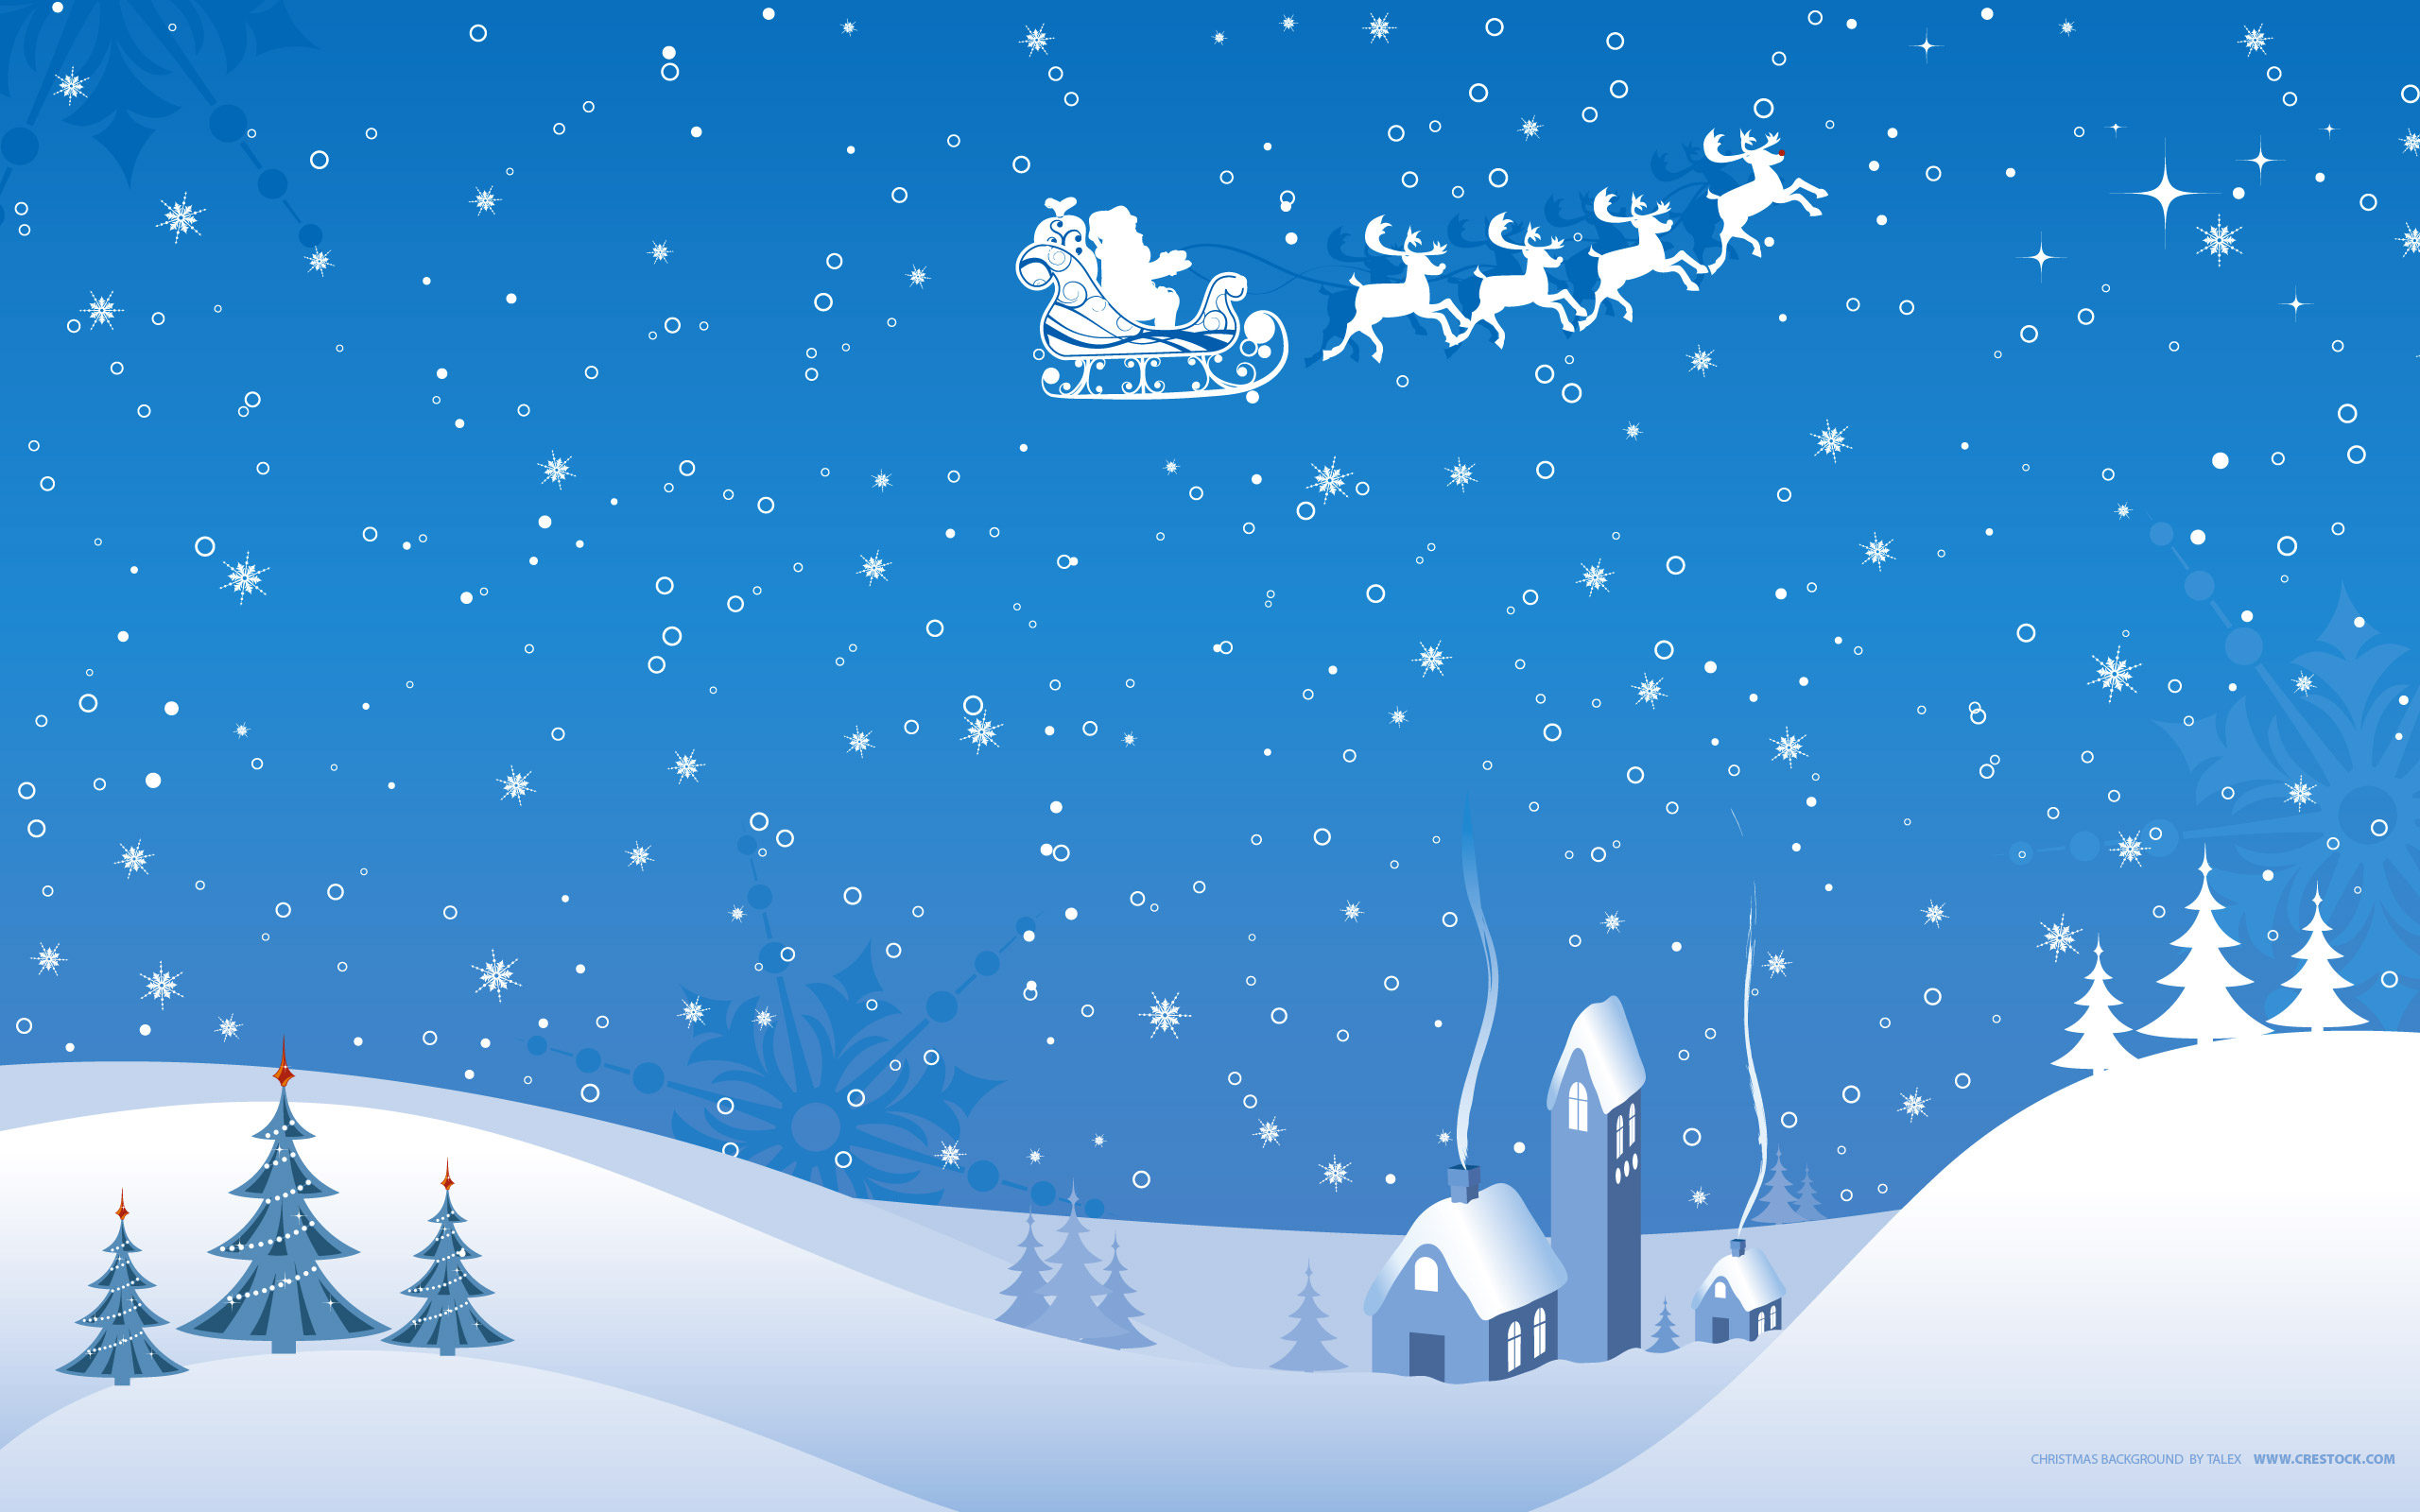 merry christmas wallpapers hd free